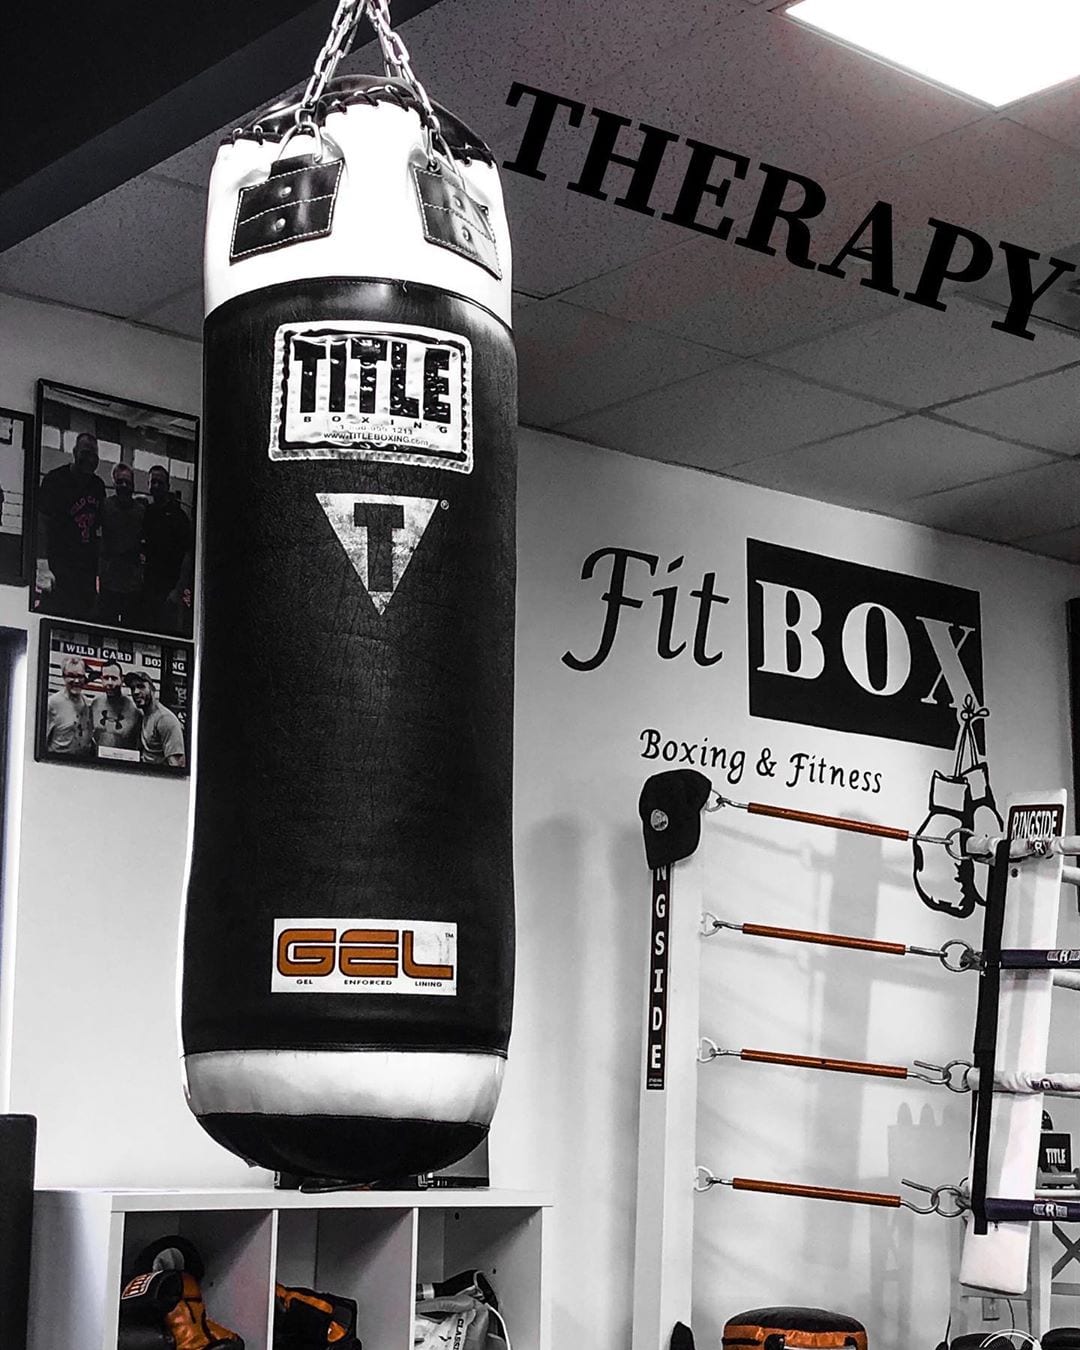 NO EXCUSES. Start Today to help Build your confidence, Feel better about yourself, Relieve Stress , Learn self-defense , and much much more that #boxing has to offer. Contact call/text (781)727-9503 or email FitBOX@outlook.com . #fitness #sweetscience #selfdefense #stronger #workout #exercise #stressrelief #feelgood #boxingtrainer #boxingtraining #bostonfitness #therapy #life #insta #boston #dedham @tommymcinerney